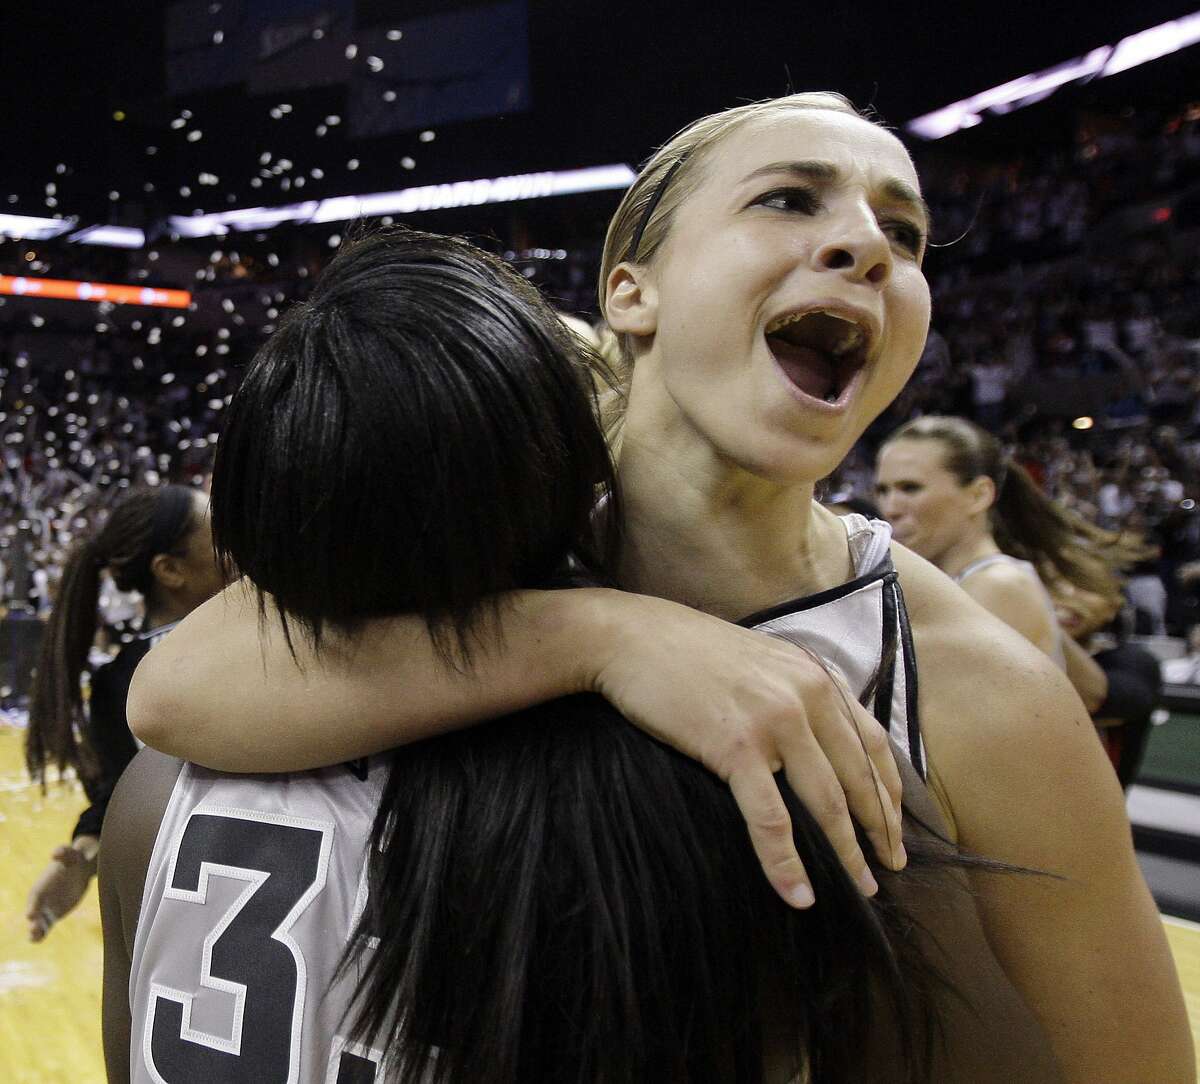 San Antonio Silver Stars' Becky Hammon, right, and Vickie Johnson, left, celebrate after defeating the Los Angeles Sparks to win game 3 of the WNBA Western Conference Finals basketball game in San Antonio, Sunday, Sept. 28, 2008. San Antonio won 76-72 and will advance to the WNBA finals. (AP Photo/Eric Gay)